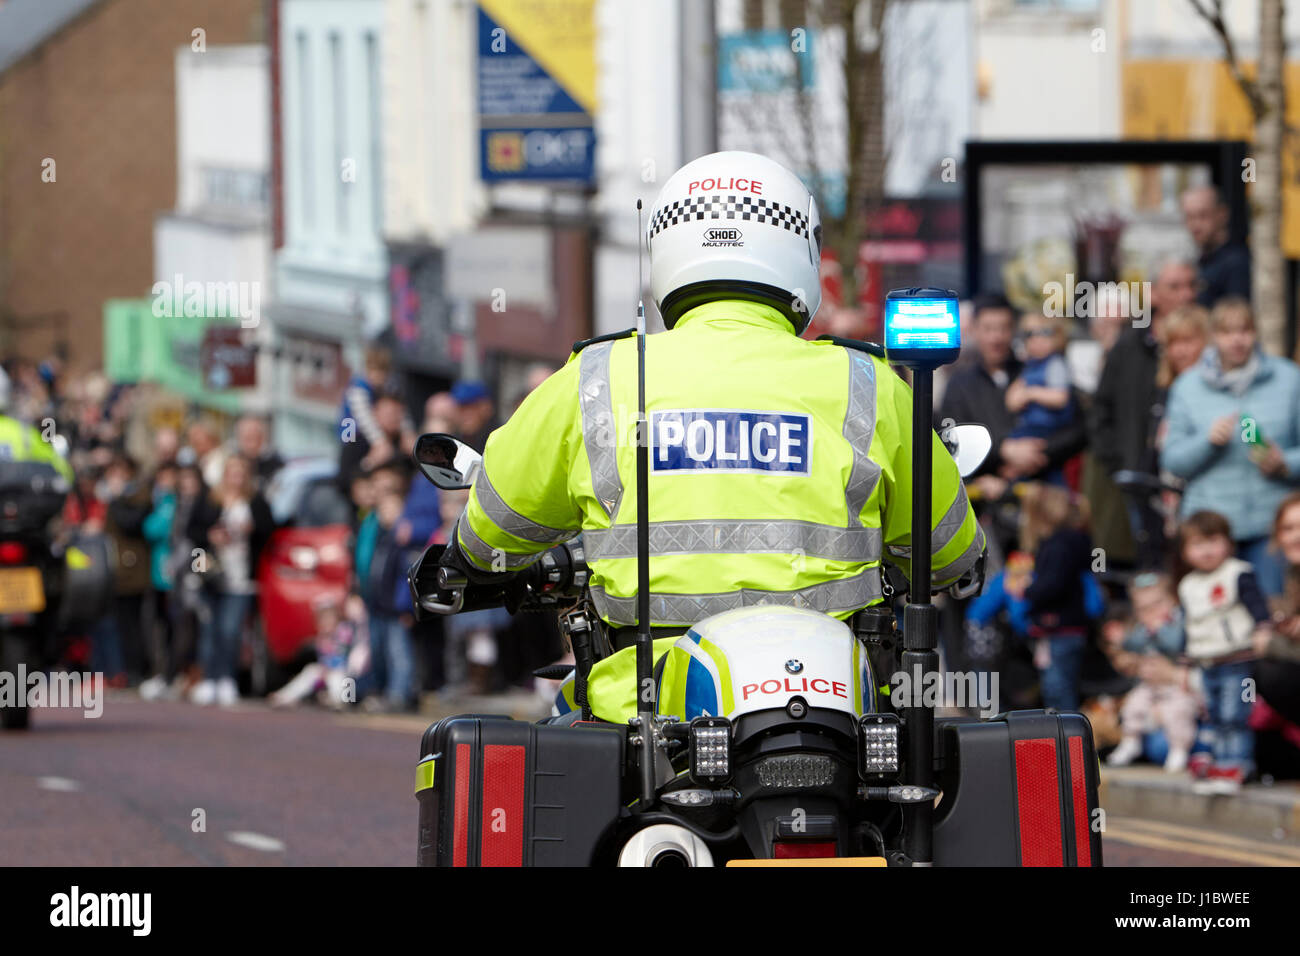 psni police officer traffic police on bmw motorbike during a parade in northern ireland Stock Photo